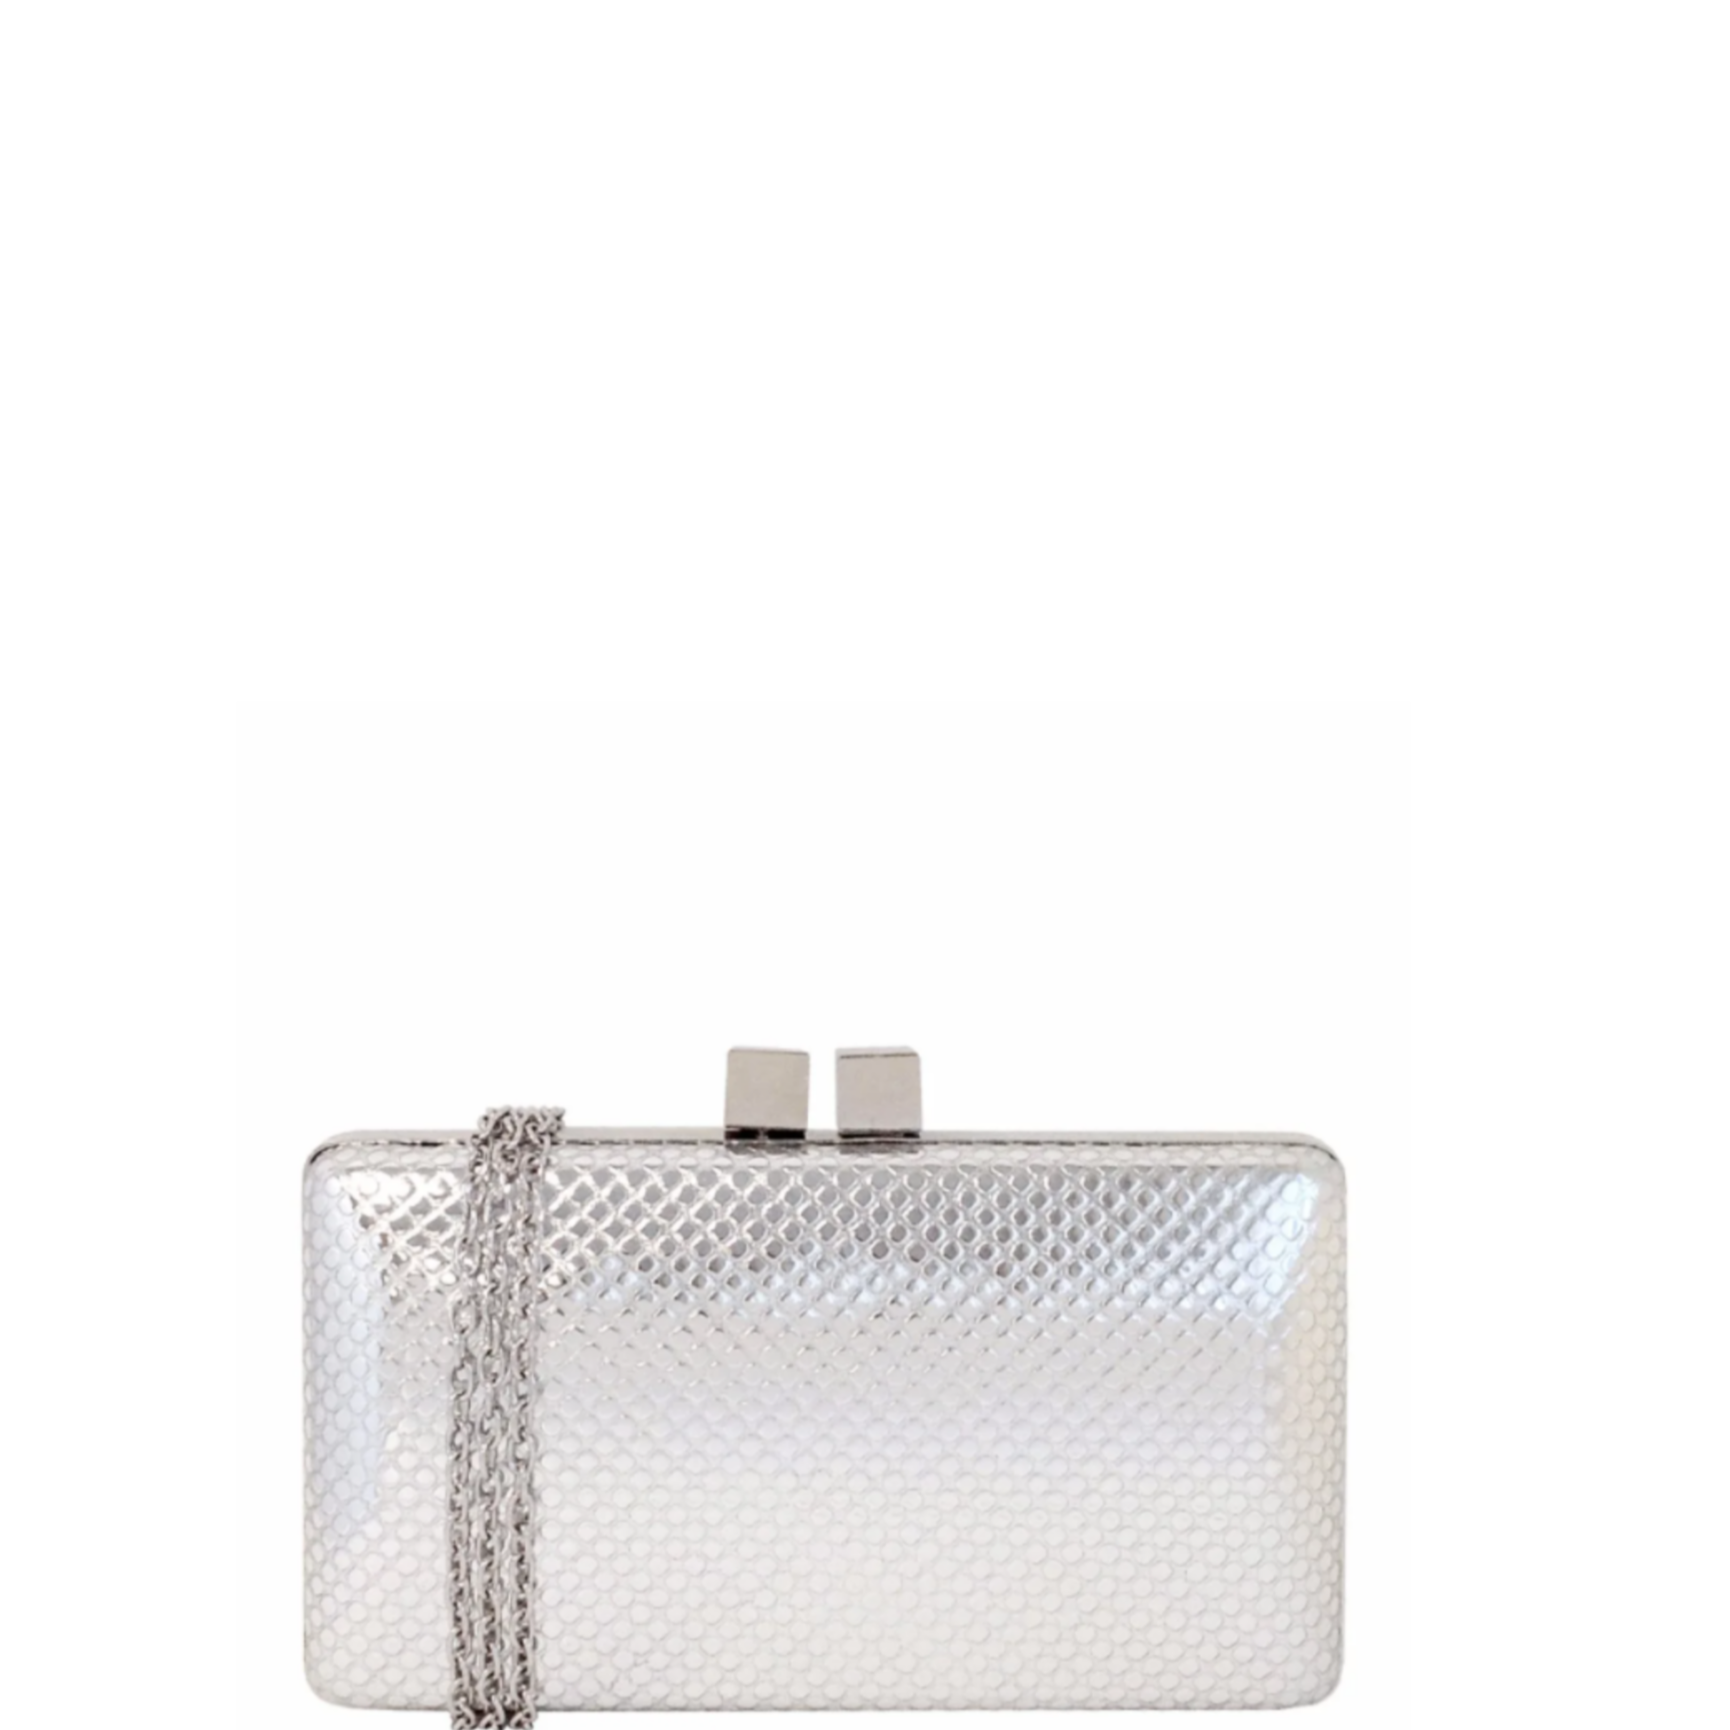 Metallic Box Clutch with Dice – Let's Bag It